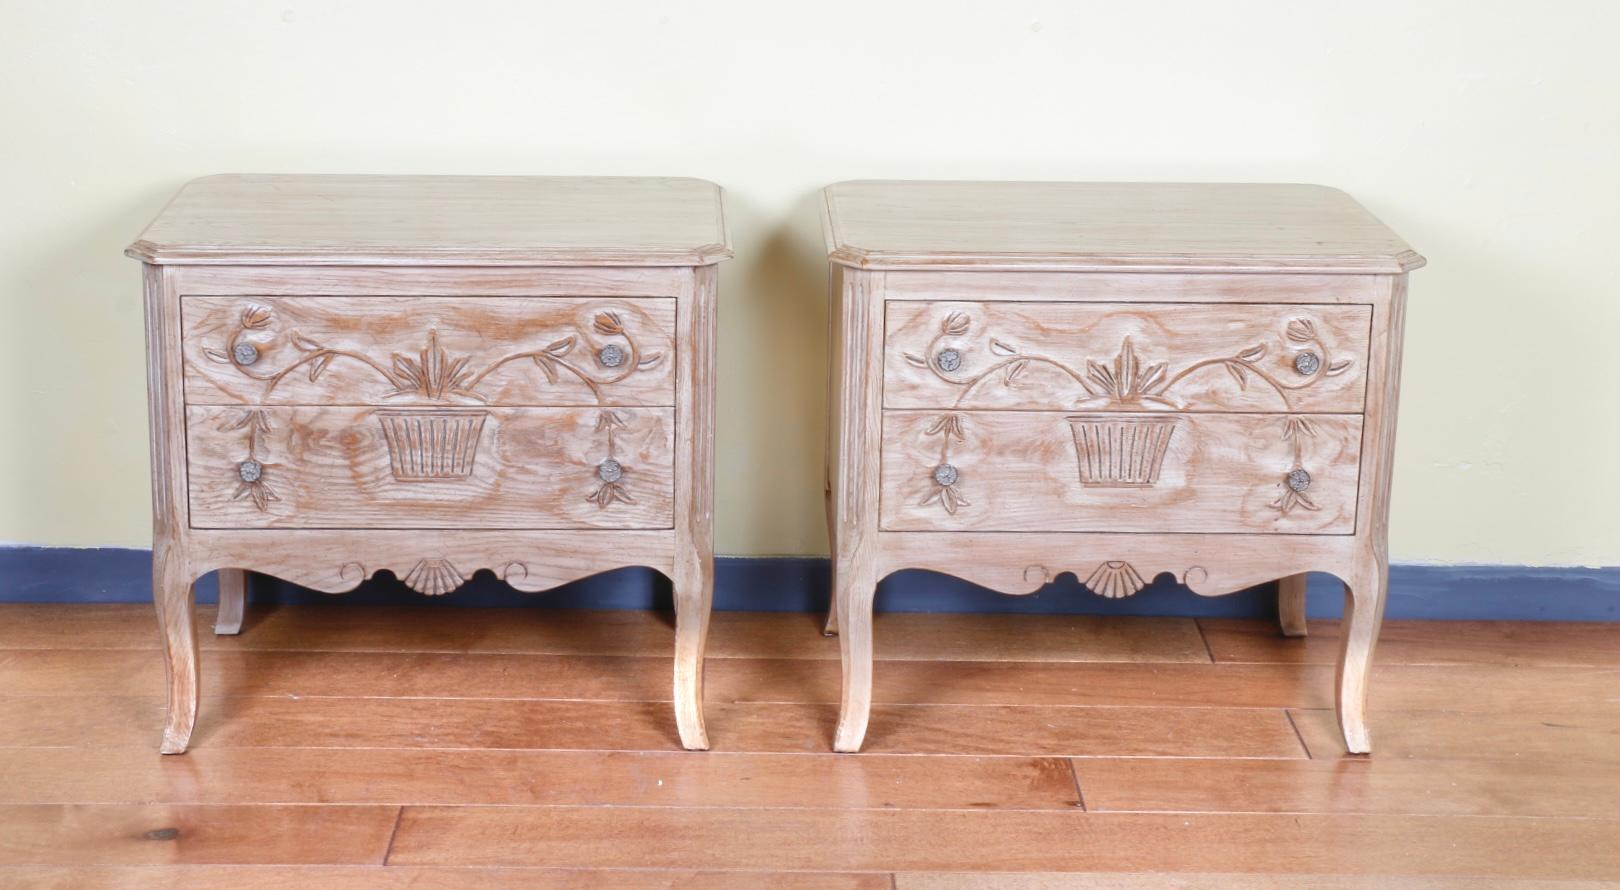 Antique pair of solid wood nightstands by Davis Cabinet Company. Beautiful detailed carvings. Very elegant looking with nice wood white wash grain. Will look amazing in any bedroom. 
Lots of storage space with working sliding drawers.